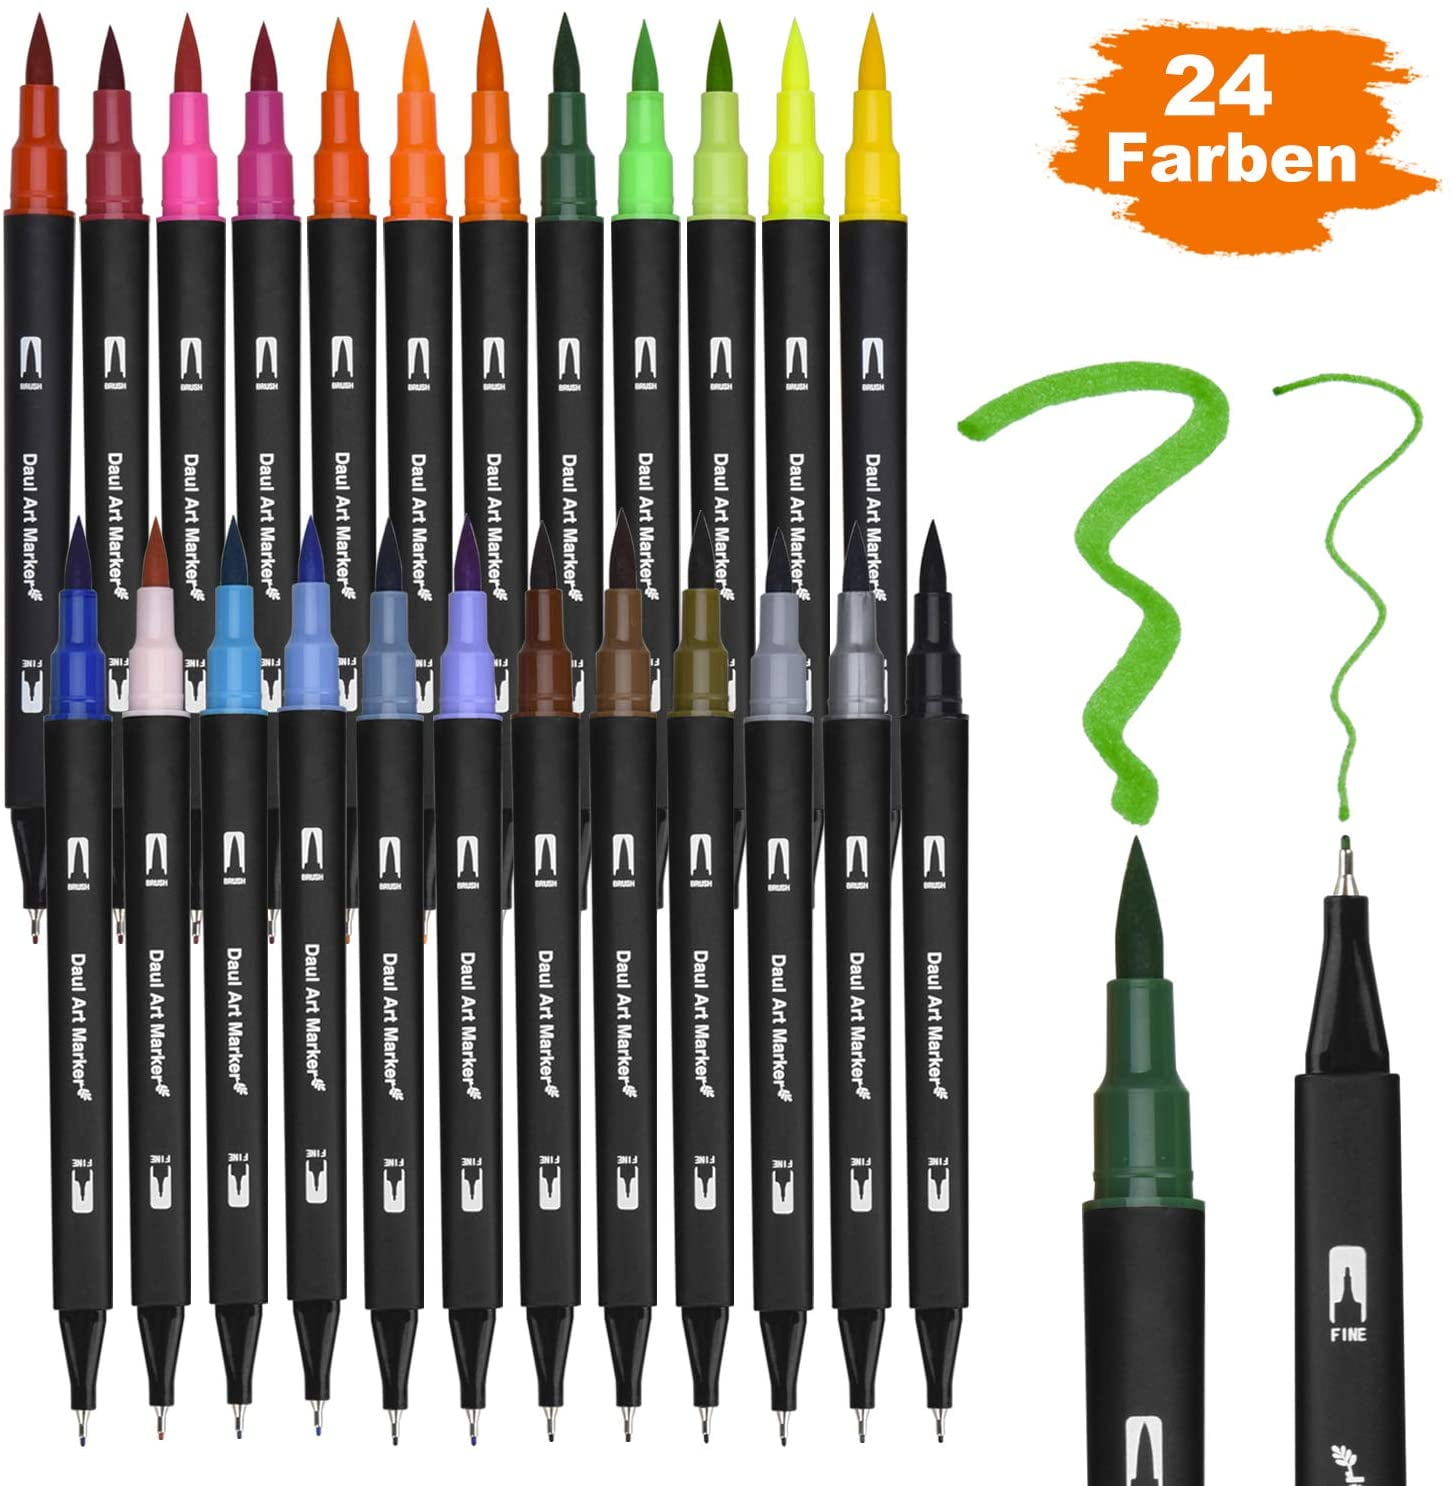 30 Colors Dual Tip Art Markers,Shuttle Art Marker Pens for Kids Adult  Coloring Books Sketching and Card Making